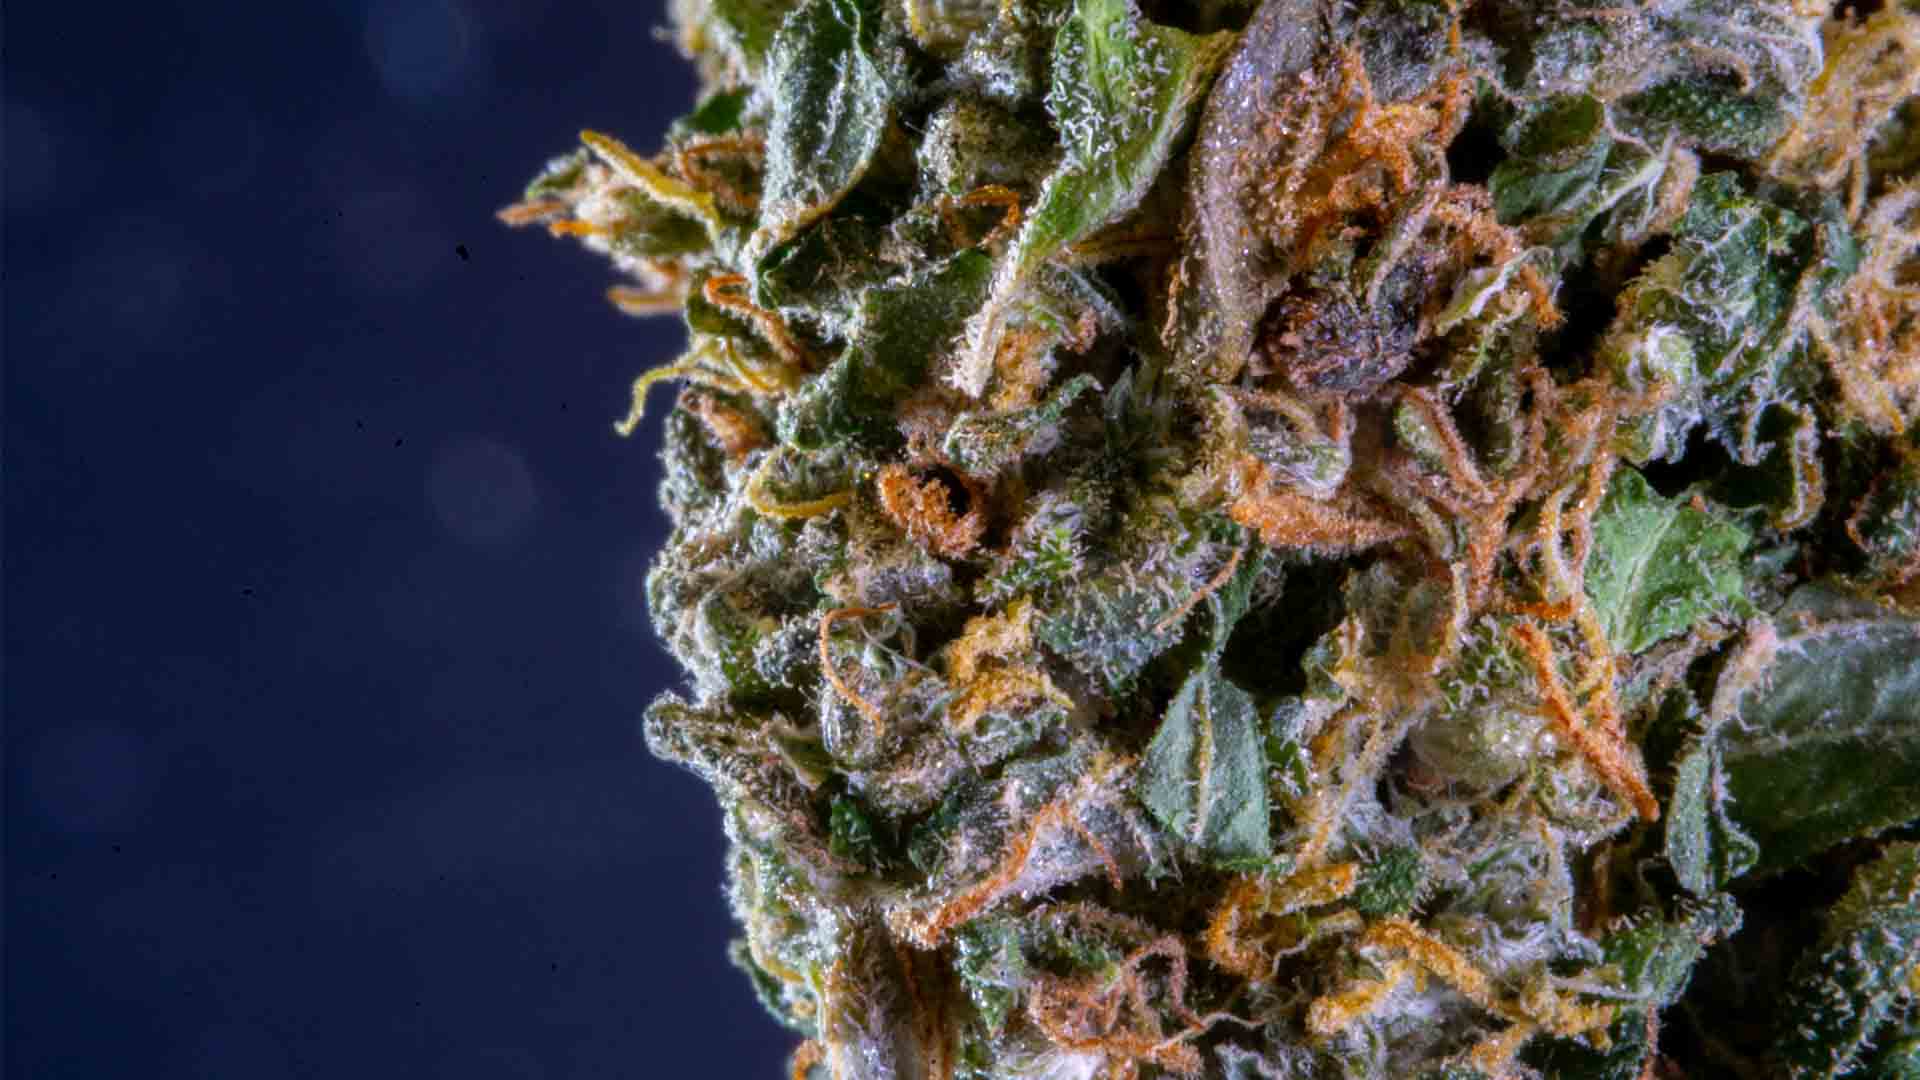 Detailed photo of a purple and green cannabis bud